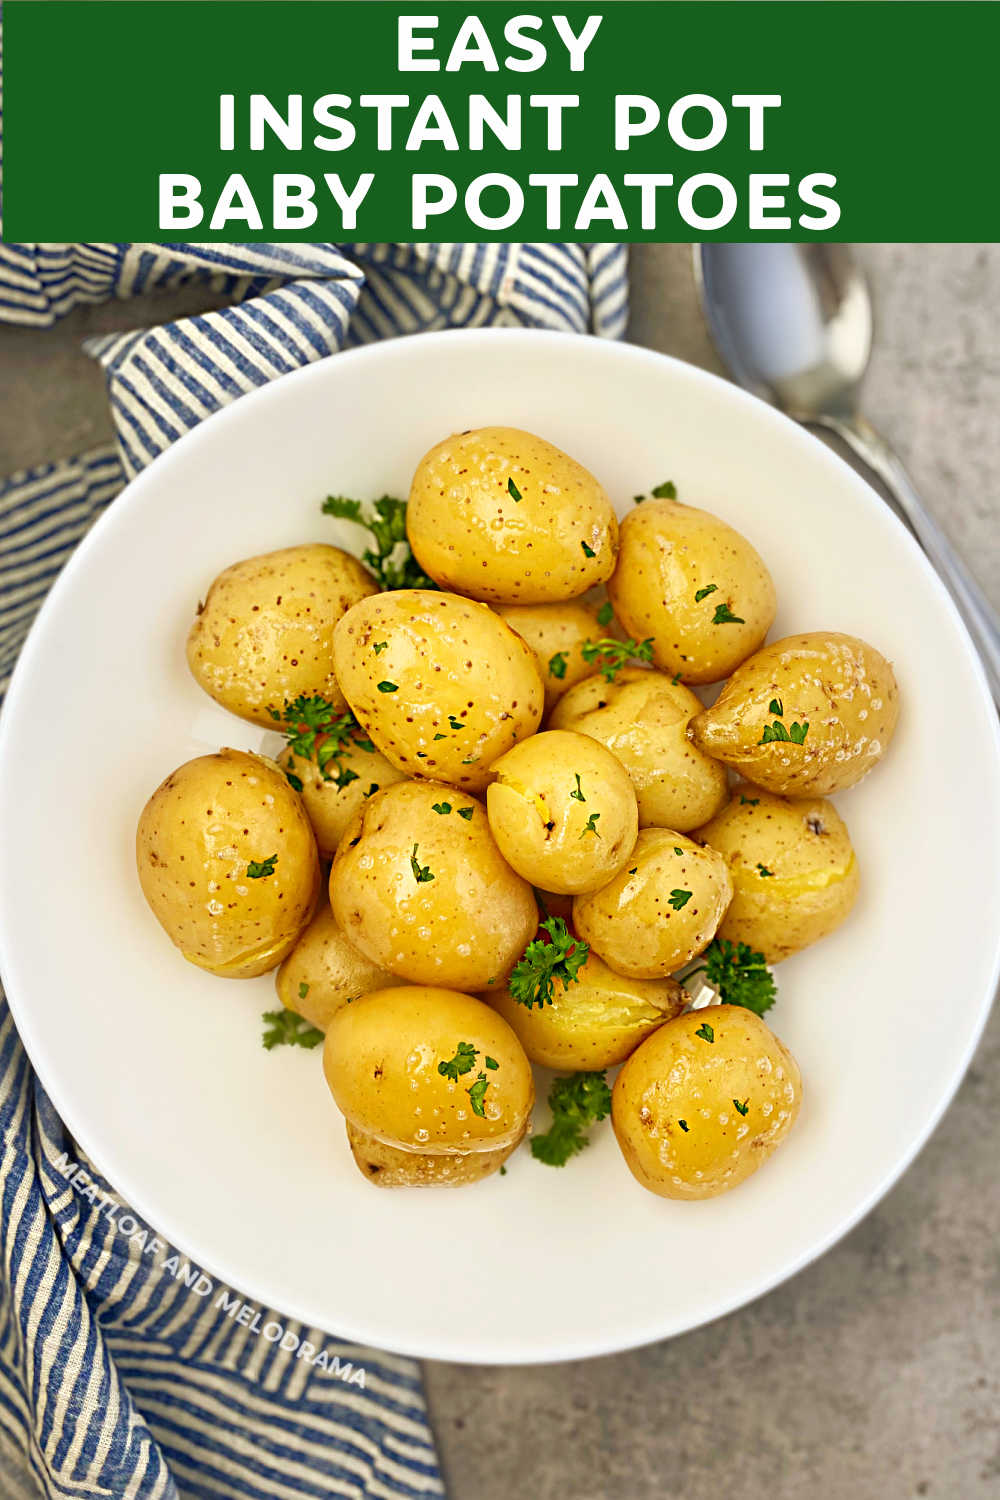 Instant Pot baby potatoes steamed in the pressure cooker until soft and fluffy are a delicious easy side dish that takes minutes to make. This simple potato recipe  is one of the easiest Instant Pot recipes you'll ever make!  via @meamel